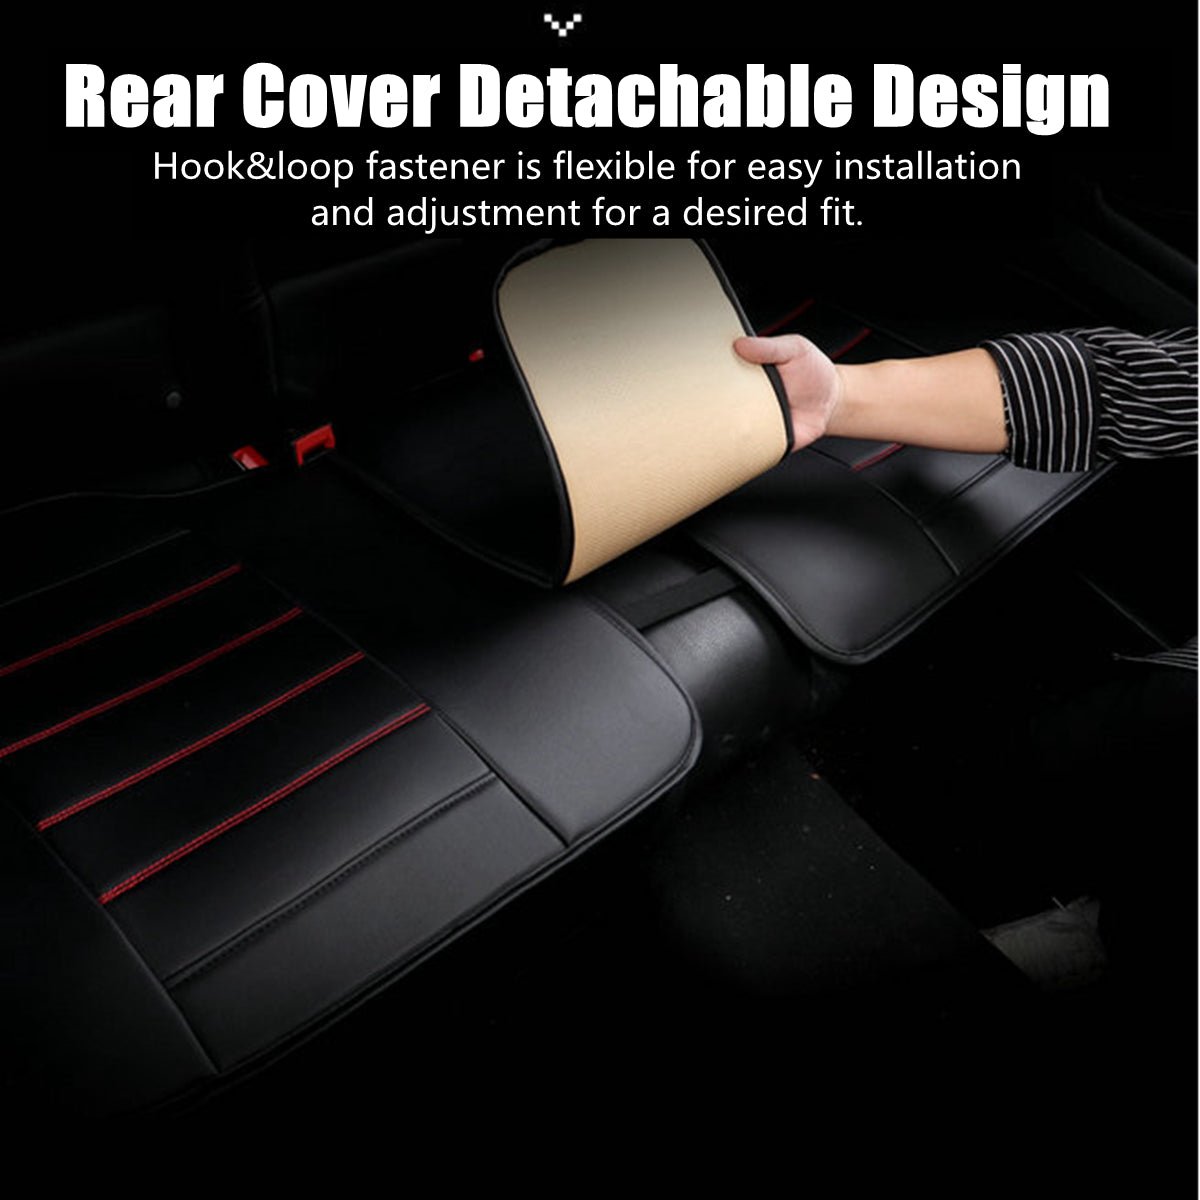 Wear-Resistant Faux Leather 5-Seater Universal Fit Seat Covers Fit for Sedan SUV Stripe Pattern